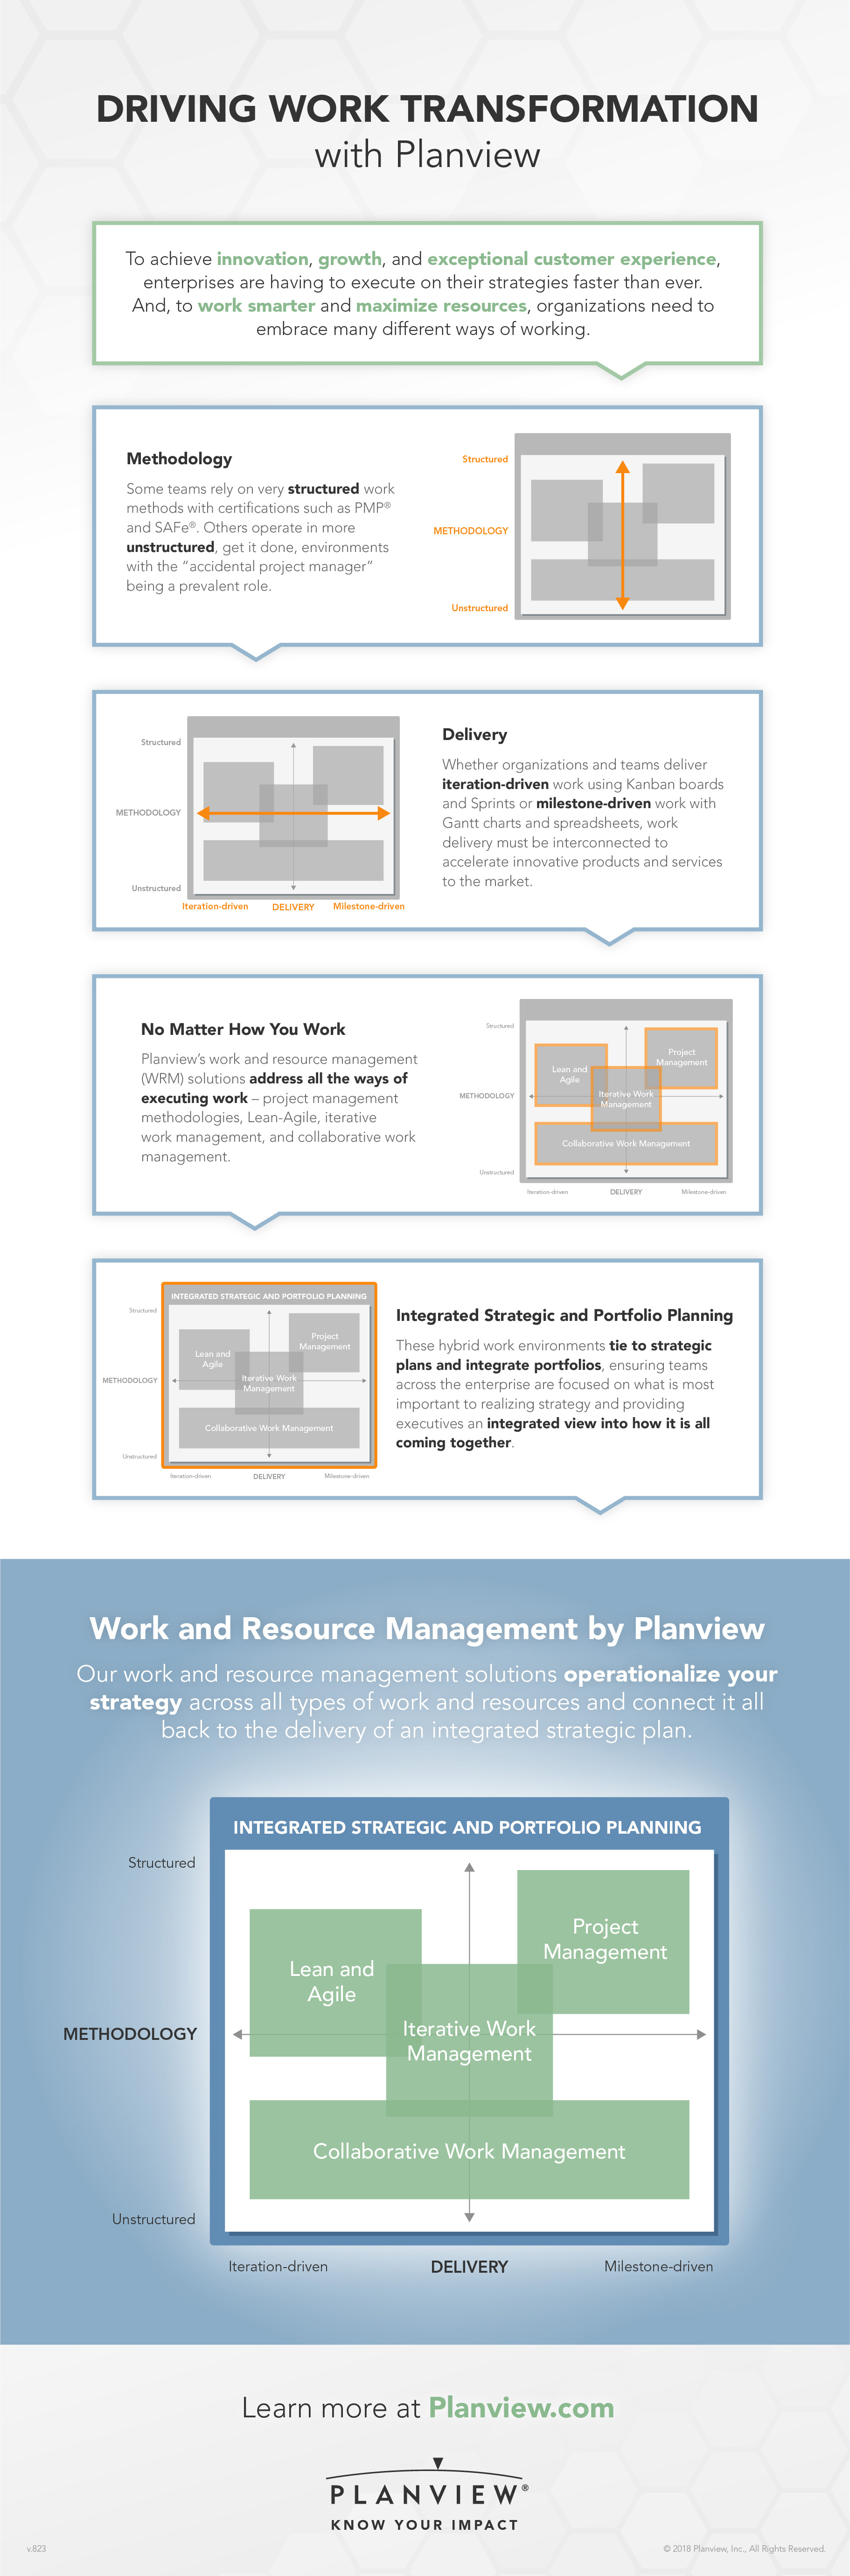 Driving Work Transformation with Planview Infographic